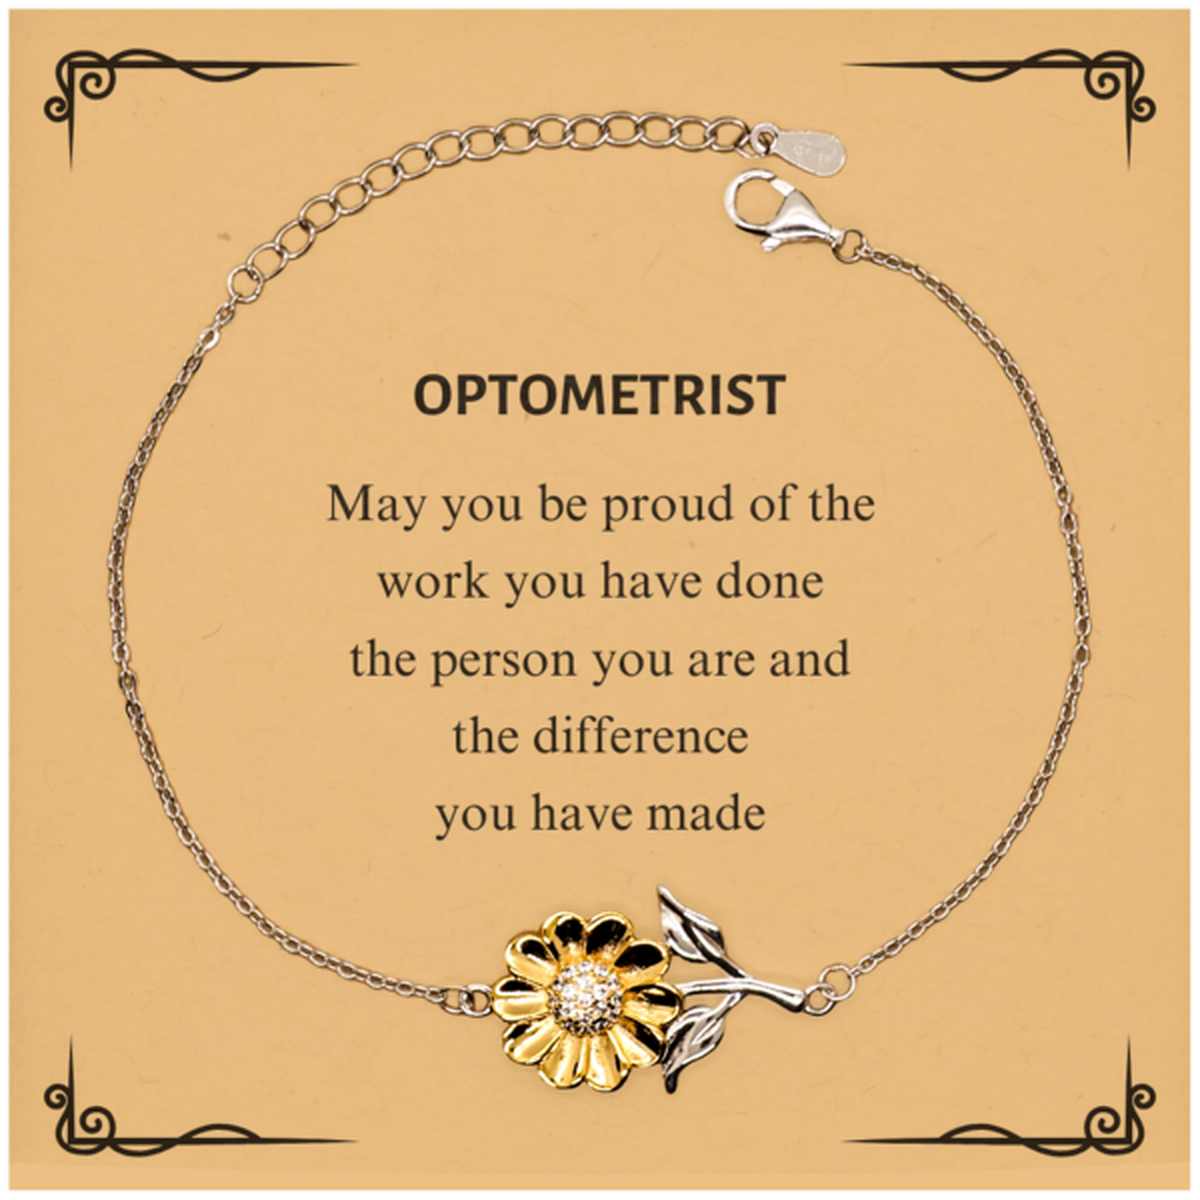 Optometrist May you be proud of the work you have done, Retirement Optometrist Sunflower Bracelet for Colleague Appreciation Gifts Amazing for Optometrist